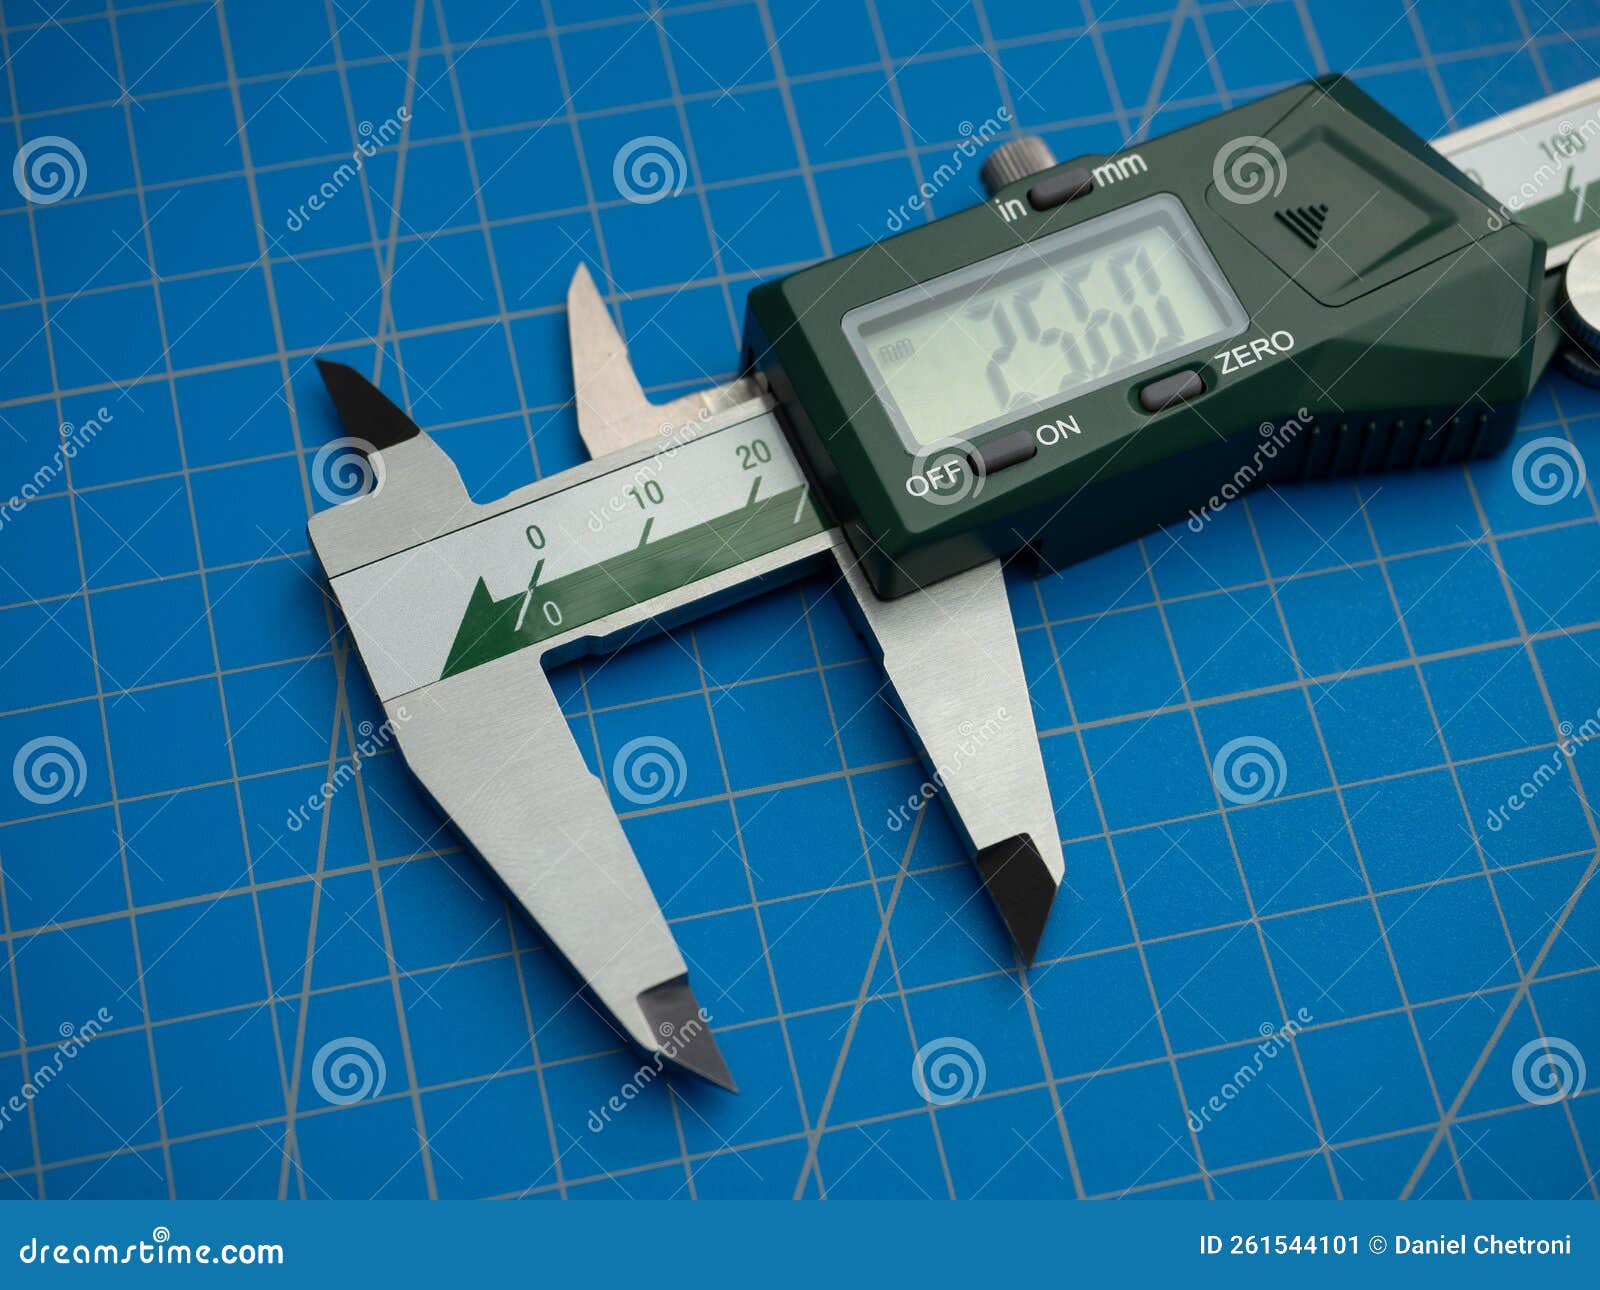 photo of a digital vernier caliper with centimeters and millimeters on a blue background cutting mat